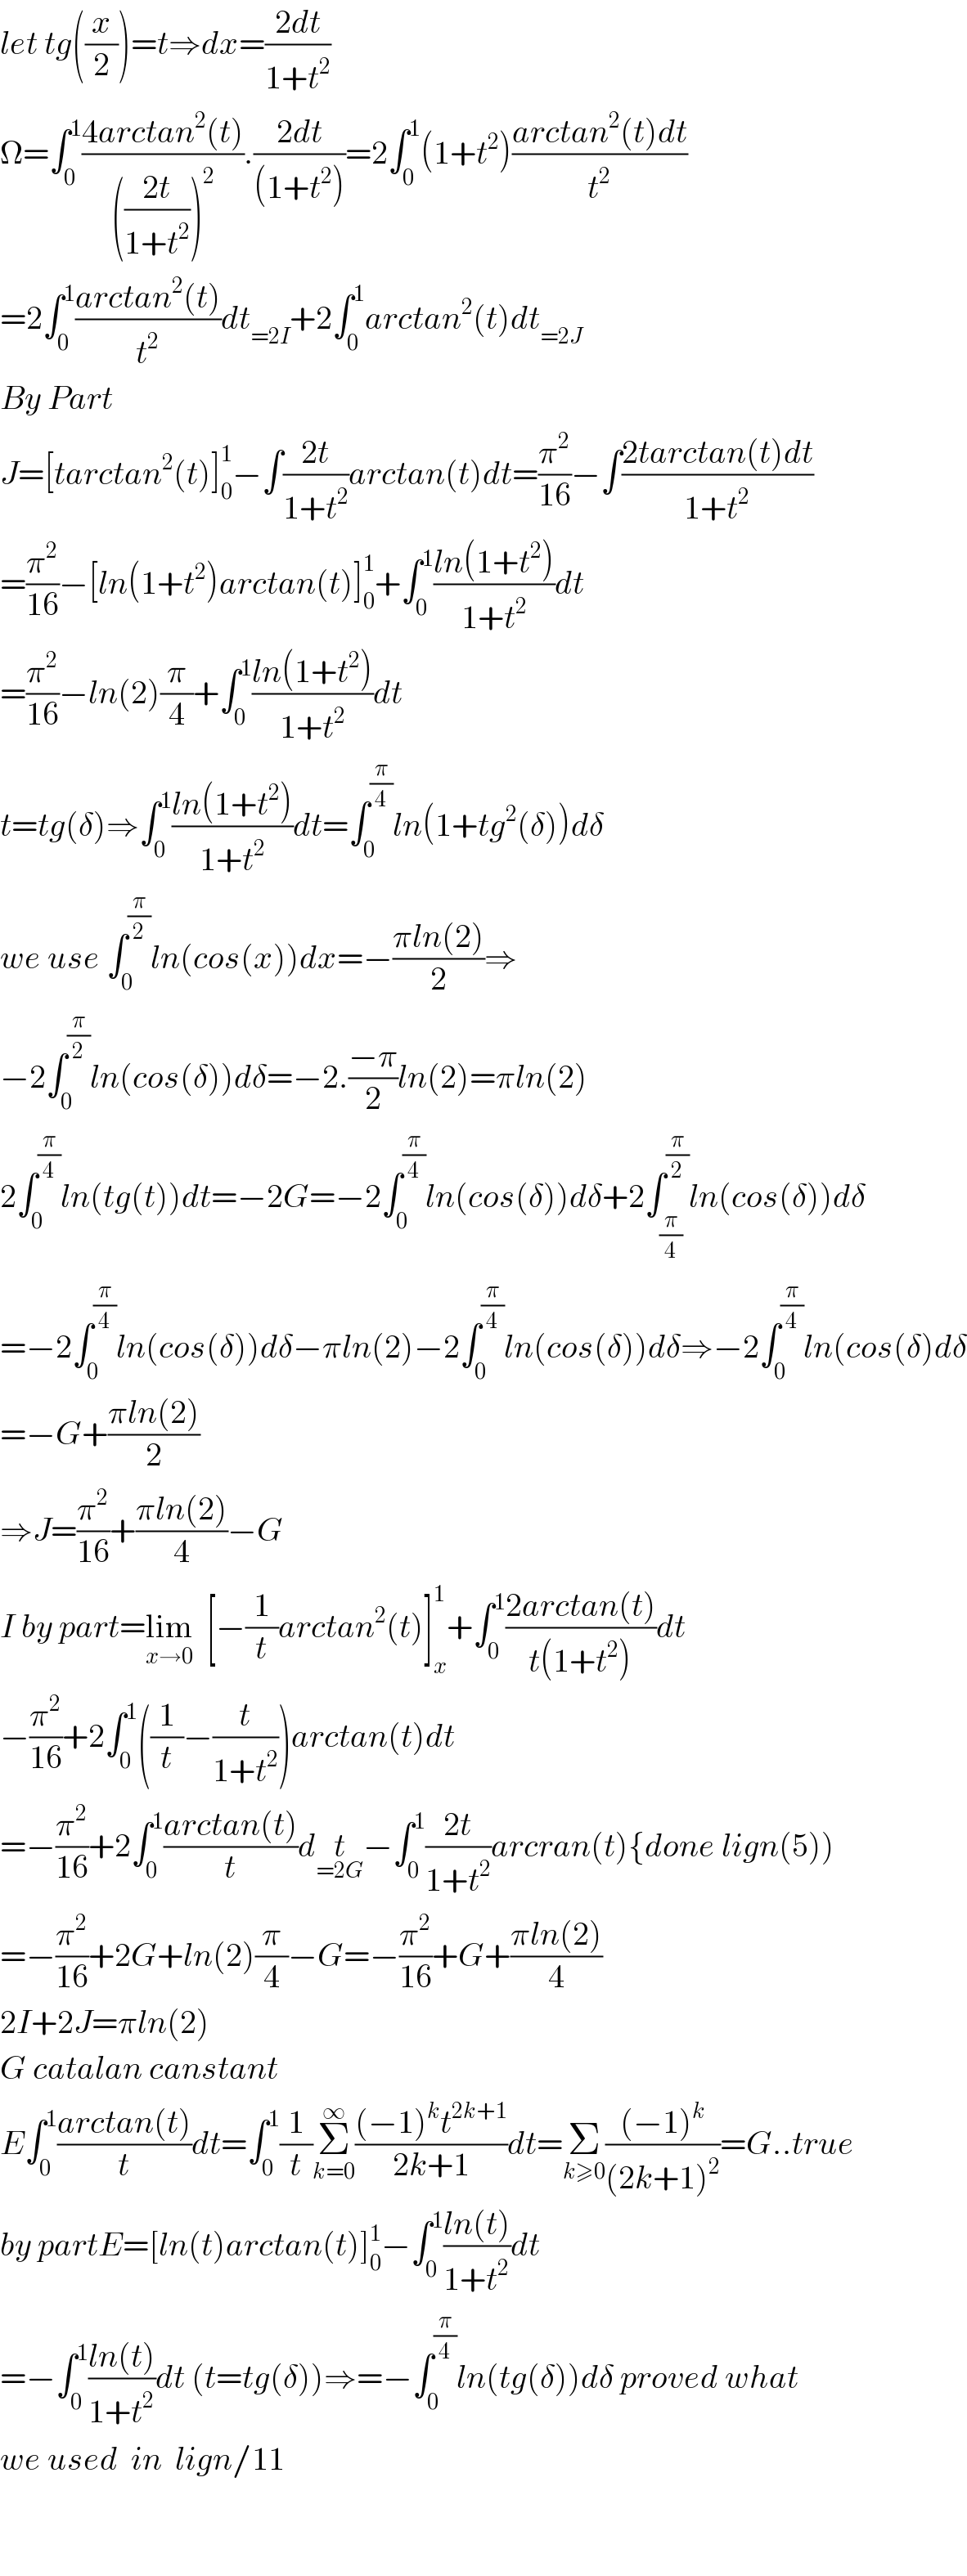 let tg((x/2))=t⇒dx=((2dt)/(1+t^2 ))  Ω=∫_0 ^1 ((4arctan^2 (t))/((((2t)/(1+t^2 )))^2 )).((2dt)/((1+t^2 )))=2∫_0 ^1 (1+t^2 )((arctan^2 (t)dt)/t^2 )  =2∫_0 ^1 ((arctan^2 (t))/t^2 )dt_(=2I) +2∫_0 ^1 arctan^2 (t)dt_(=2J)   By Part   J=[tarctan^2 (t)]_0 ^1 −∫((2t)/(1+t^2 ))arctan(t)dt=(π^2 /(16))−∫((2tarctan(t)dt)/(1+t^2 ))  =(π^2 /(16))−[ln(1+t^2 )arctan(t)]_0 ^1 +∫_0 ^1 ((ln(1+t^2 ))/(1+t^2 ))dt  =(π^2 /(16))−ln(2)(π/4)+∫_0 ^1 ((ln(1+t^2 ))/(1+t^2 ))dt  t=tg(δ)⇒∫_0 ^1 ((ln(1+t^2 ))/(1+t^2 ))dt=∫_0 ^(π/4) ln(1+tg^2 (δ))dδ  we use ∫_0 ^(π/2) ln(cos(x))dx=−((πln(2))/2)⇒  −2∫_0 ^(π/2) ln(cos(δ))dδ=−2.((−π)/2)ln(2)=πln(2)  2∫_0 ^(π/4) ln(tg(t))dt=−2G=−2∫_0 ^(π/4) ln(cos(δ))dδ+2∫_(π/4) ^(π/2) ln(cos(δ))dδ  =−2∫_0 ^(π/4) ln(cos(δ))dδ−πln(2)−2∫_0 ^(π/4) ln(cos(δ))dδ⇒−2∫_0 ^(π/4) ln(cos(δ)dδ  =−G+((πln(2))/2)  ⇒J=(π^2 /(16))+((πln(2))/4)−G  I by part=lim_(x→0)   [−(1/t)arctan^2 (t)]_x ^1 +∫_0 ^1 ((2arctan(t))/(t(1+t^2 )))dt  −(π^2 /(16))+2∫_0 ^1 ((1/t)−(t/(1+t^2 )))arctan(t)dt  =−(π^2 /(16))+2∫_0 ^1 ((arctan(t))/t)dt_(=2G) −∫_0 ^1 ((2t)/(1+t^2 ))arcran(t){done lign(5))  =−(π^2 /(16))+2G+ln(2)(π/4)−G=−(π^2 /(16))+G+((πln(2))/4)  2I+2J=πln(2)    G catalan canstant   E∫_0 ^1 ((arctan(t))/t)dt=∫_0 ^1 (1/t)Σ_(k=0) ^∞ (((−1)^k t^(2k+1) )/(2k+1))dt=Σ_(k≥0) (((−1)^k )/((2k+1)^2 ))=G..true  by partE=[ln(t)arctan(t)]_0 ^1 −∫_0 ^1 ((ln(t))/(1+t^2 ))dt  =−∫_0 ^1 ((ln(t))/(1+t^2 ))dt (t=tg(δ))⇒=−∫_0 ^(π/4) ln(tg(δ))dδ proved what   we used  in  lign/11      